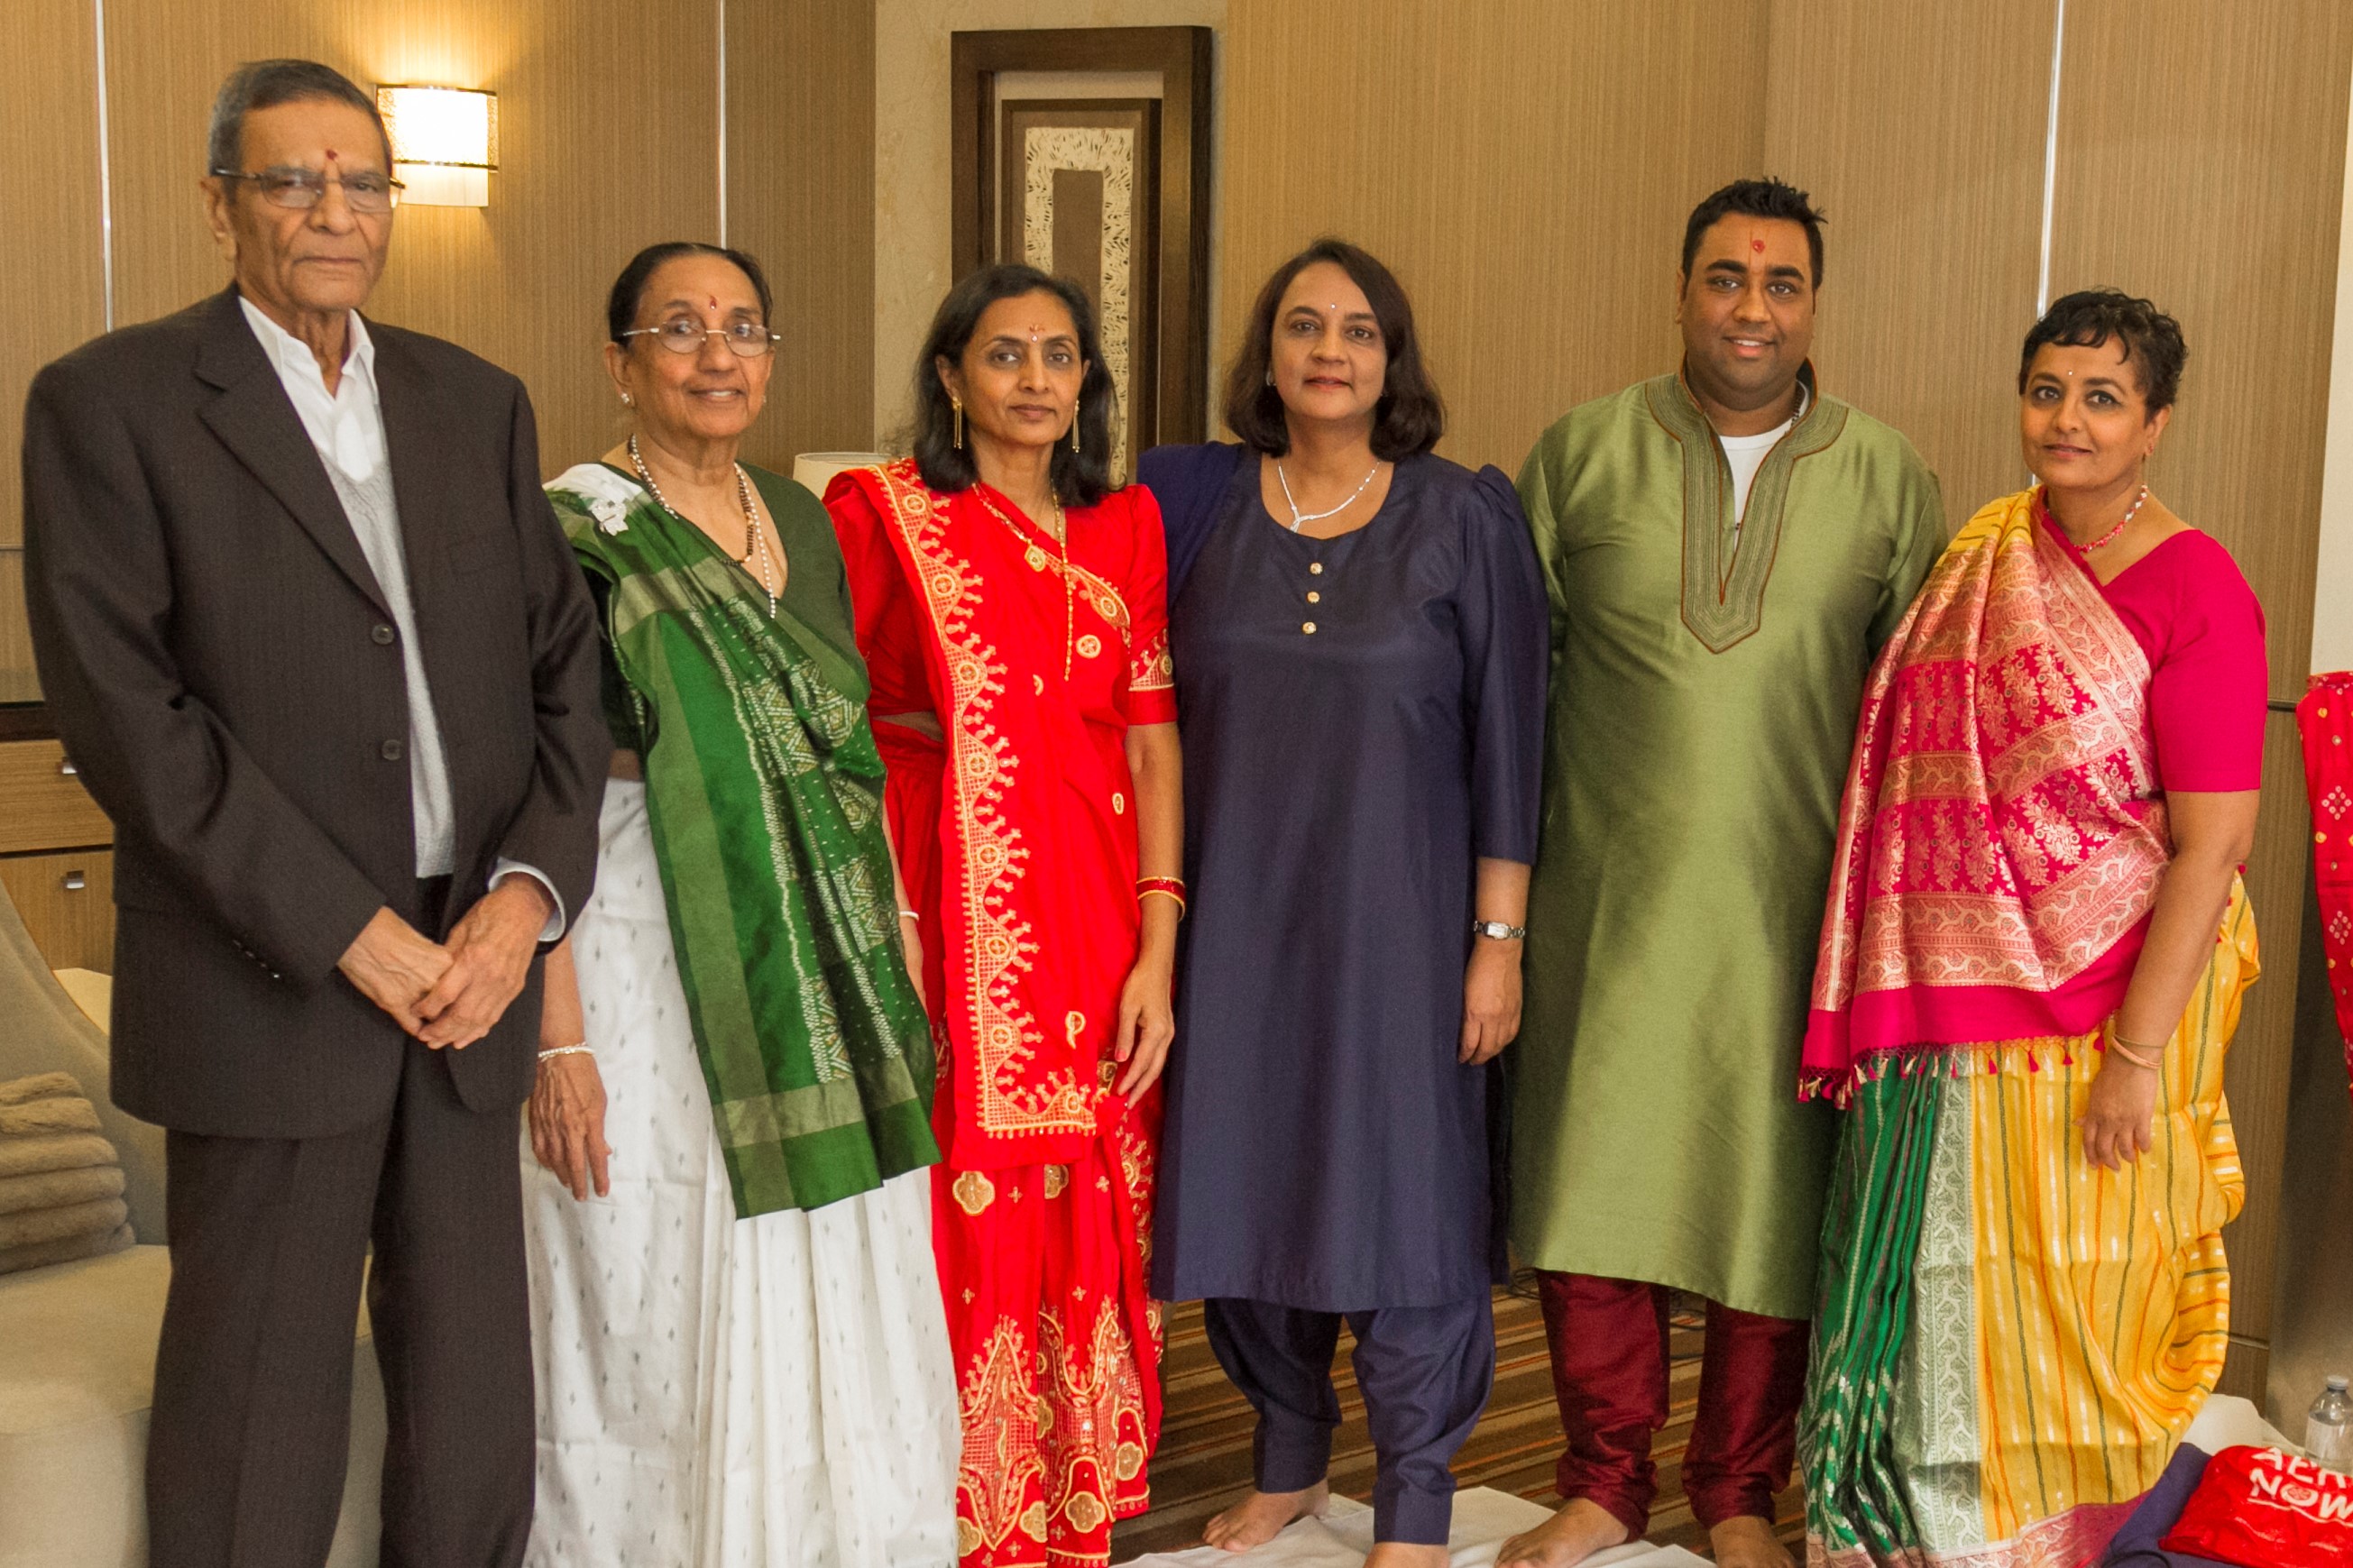 Group photo of the Patel family in formal wear